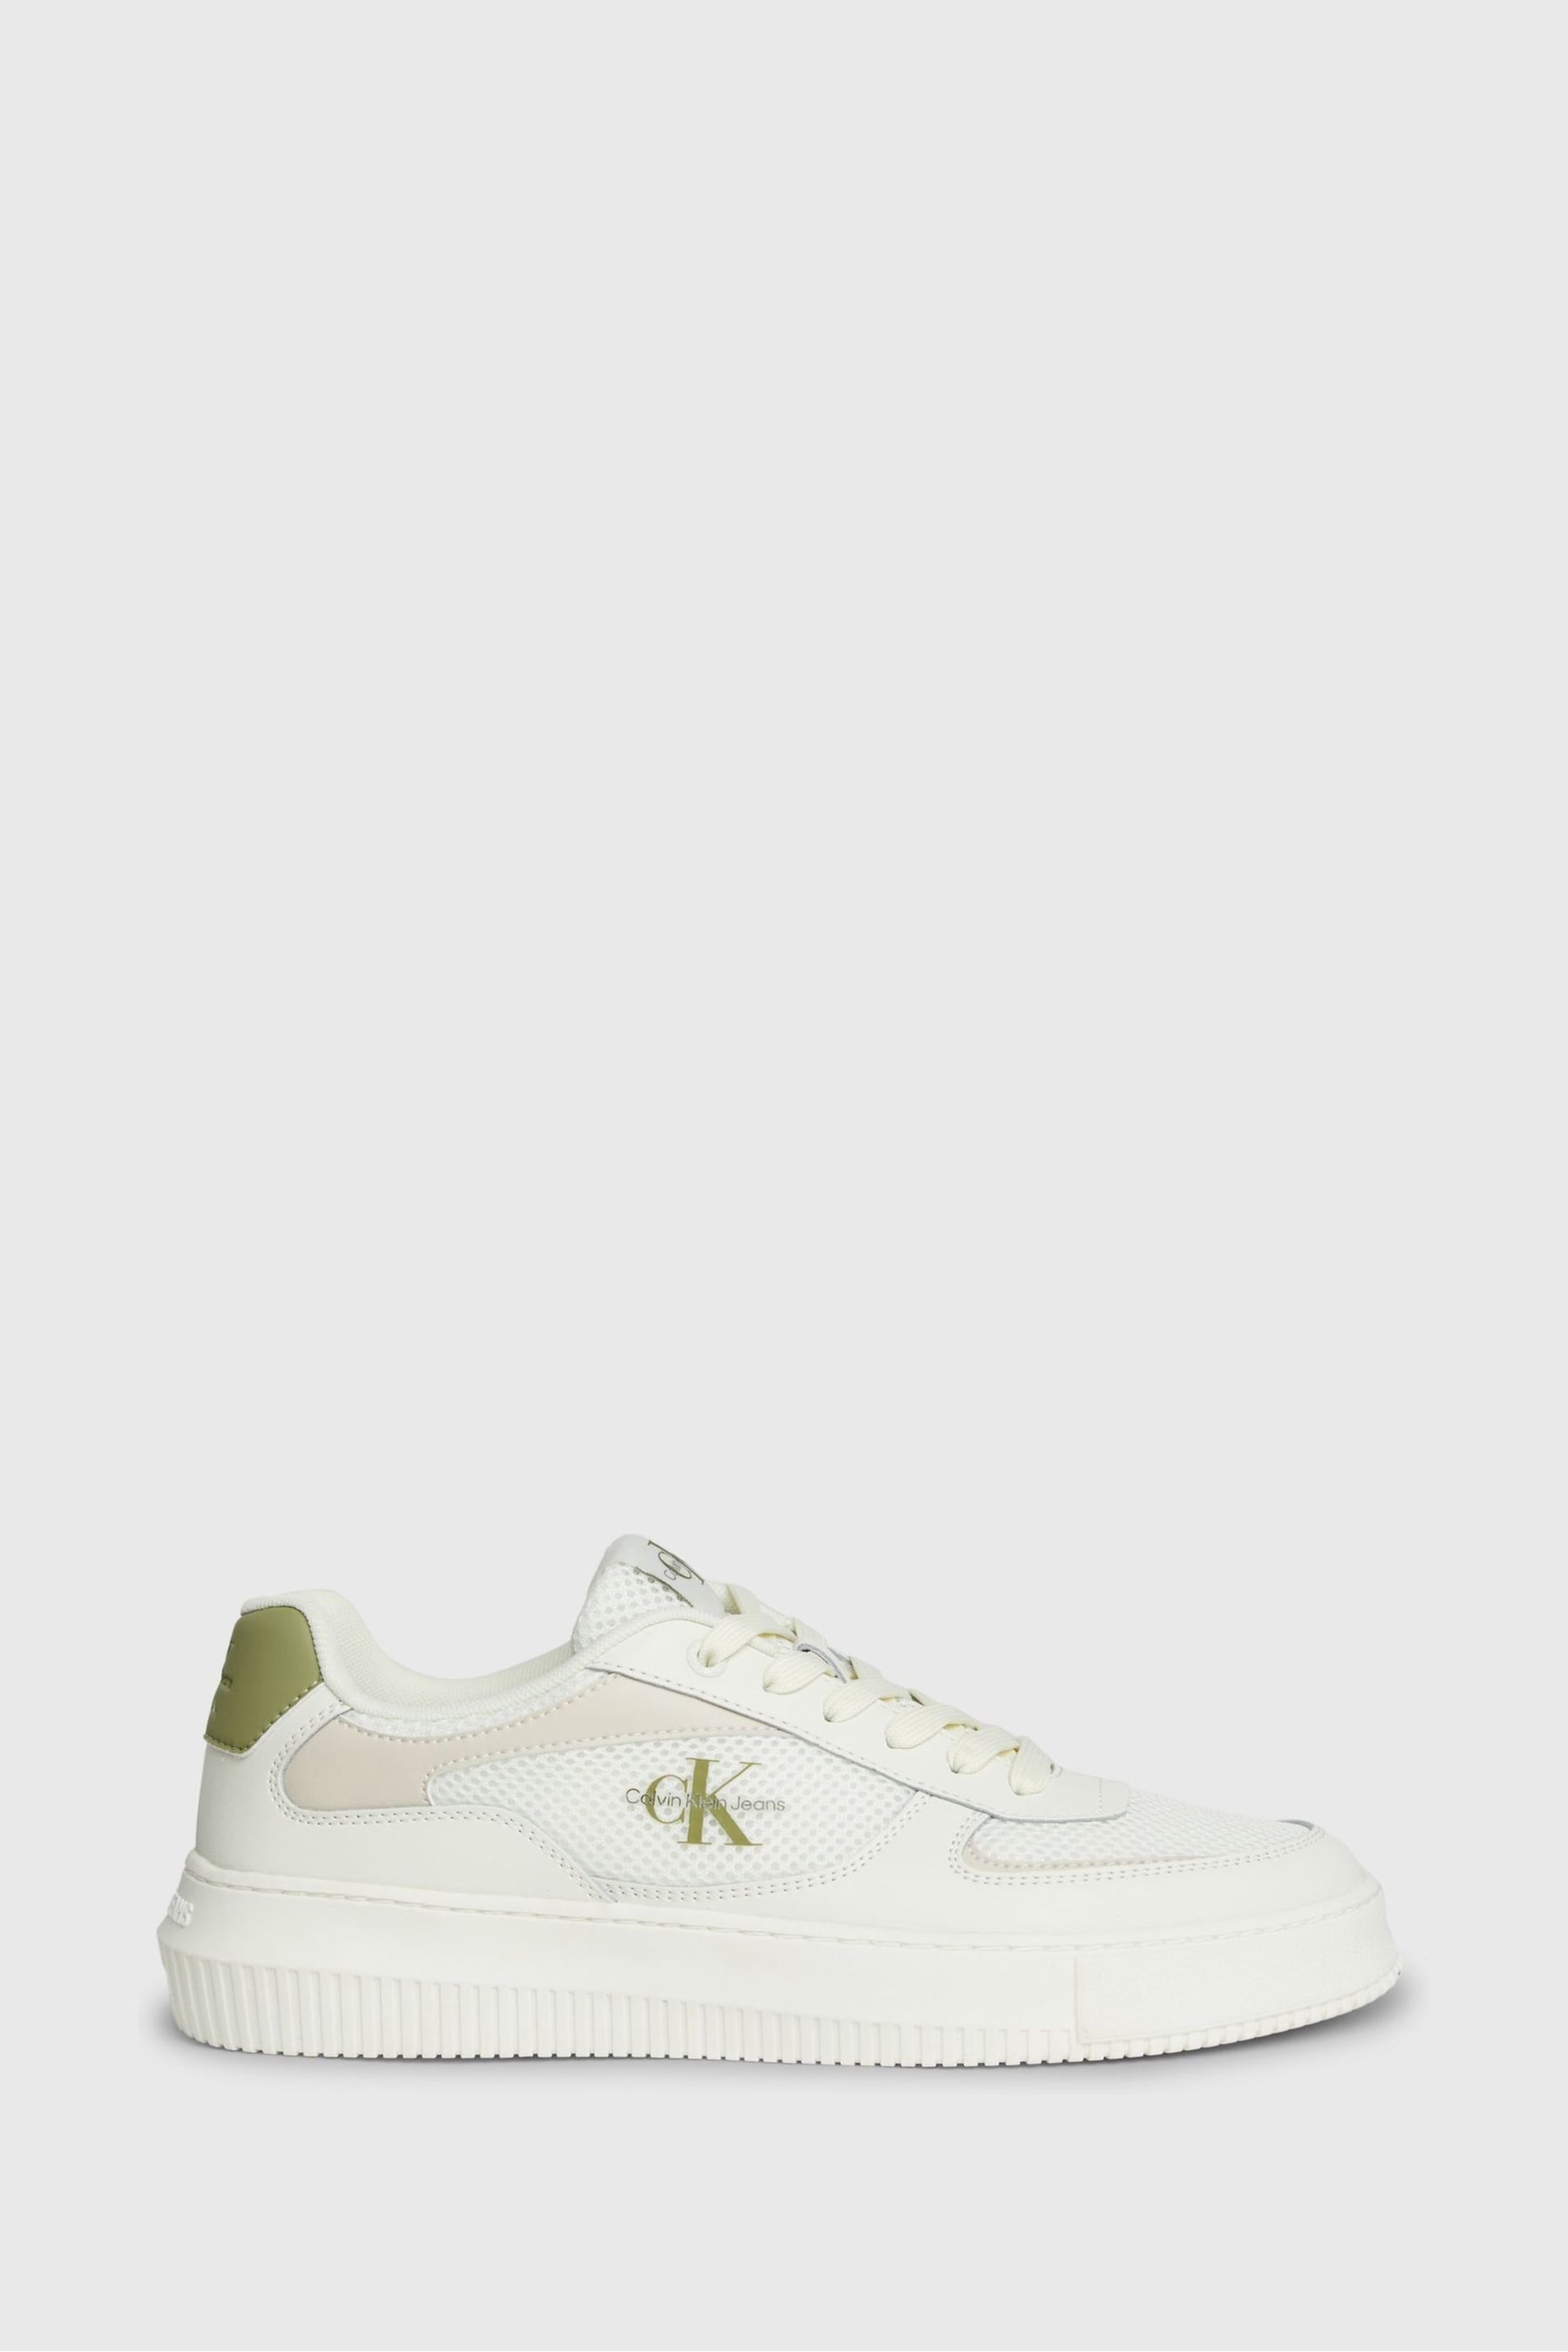 Calvin Klein White Chunky Cupsole Sneakers - Image 1 of 7